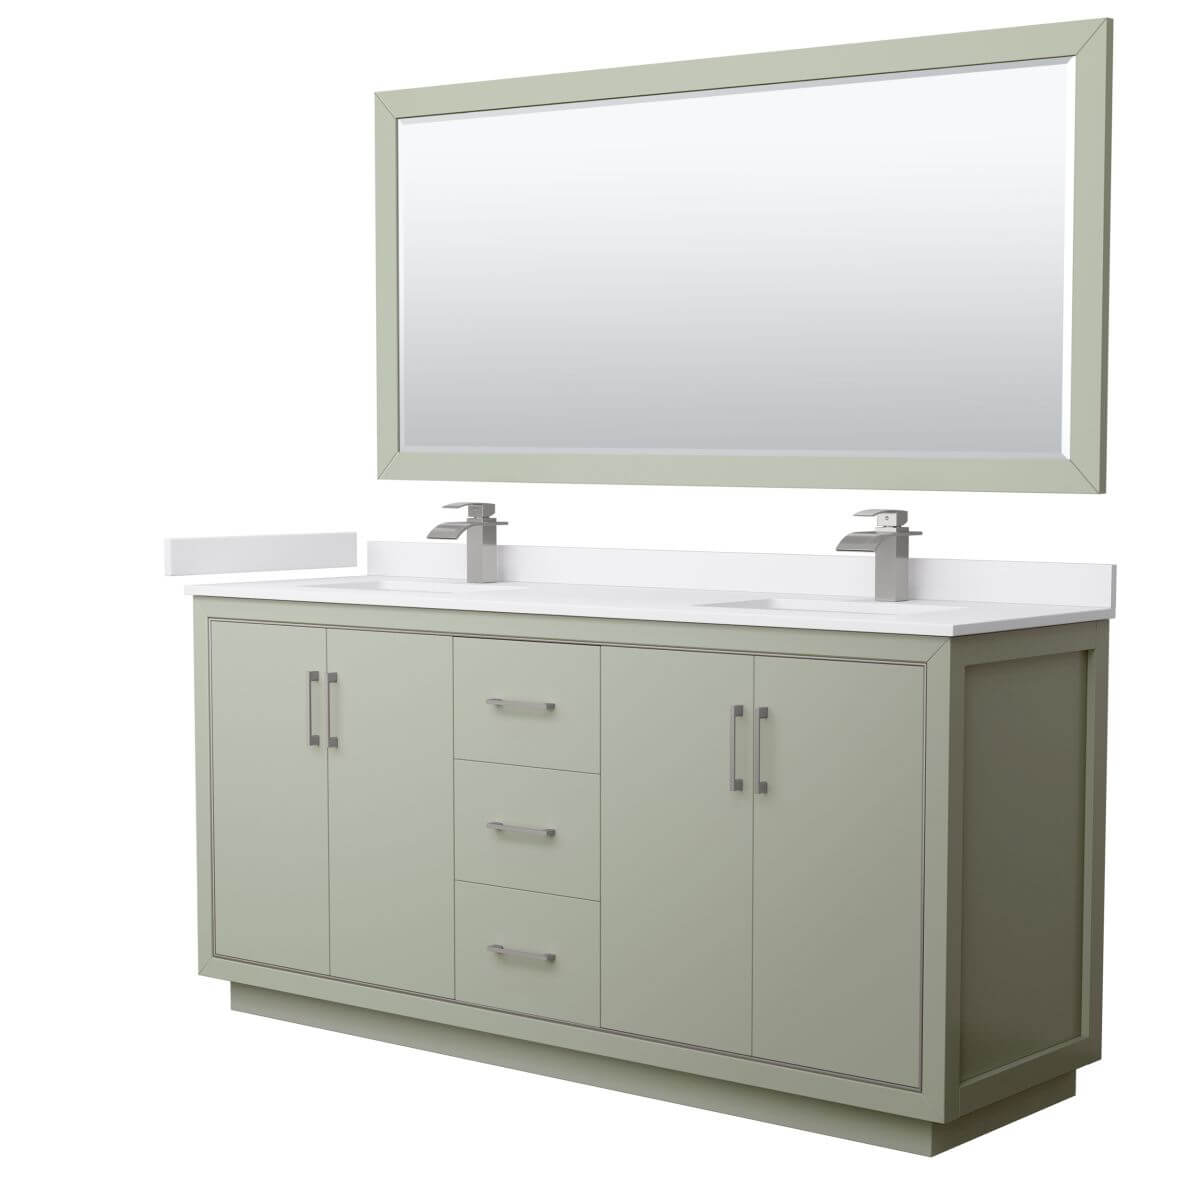 Wyndham Collection WCF111172DLGWCUNSM70 Icon 72 inch Double Bathroom Vanity in Light Green with White Cultured Marble Countertop, Undermount Square Sinks, Brushed Nickel Trim and 70 Inch Mirror